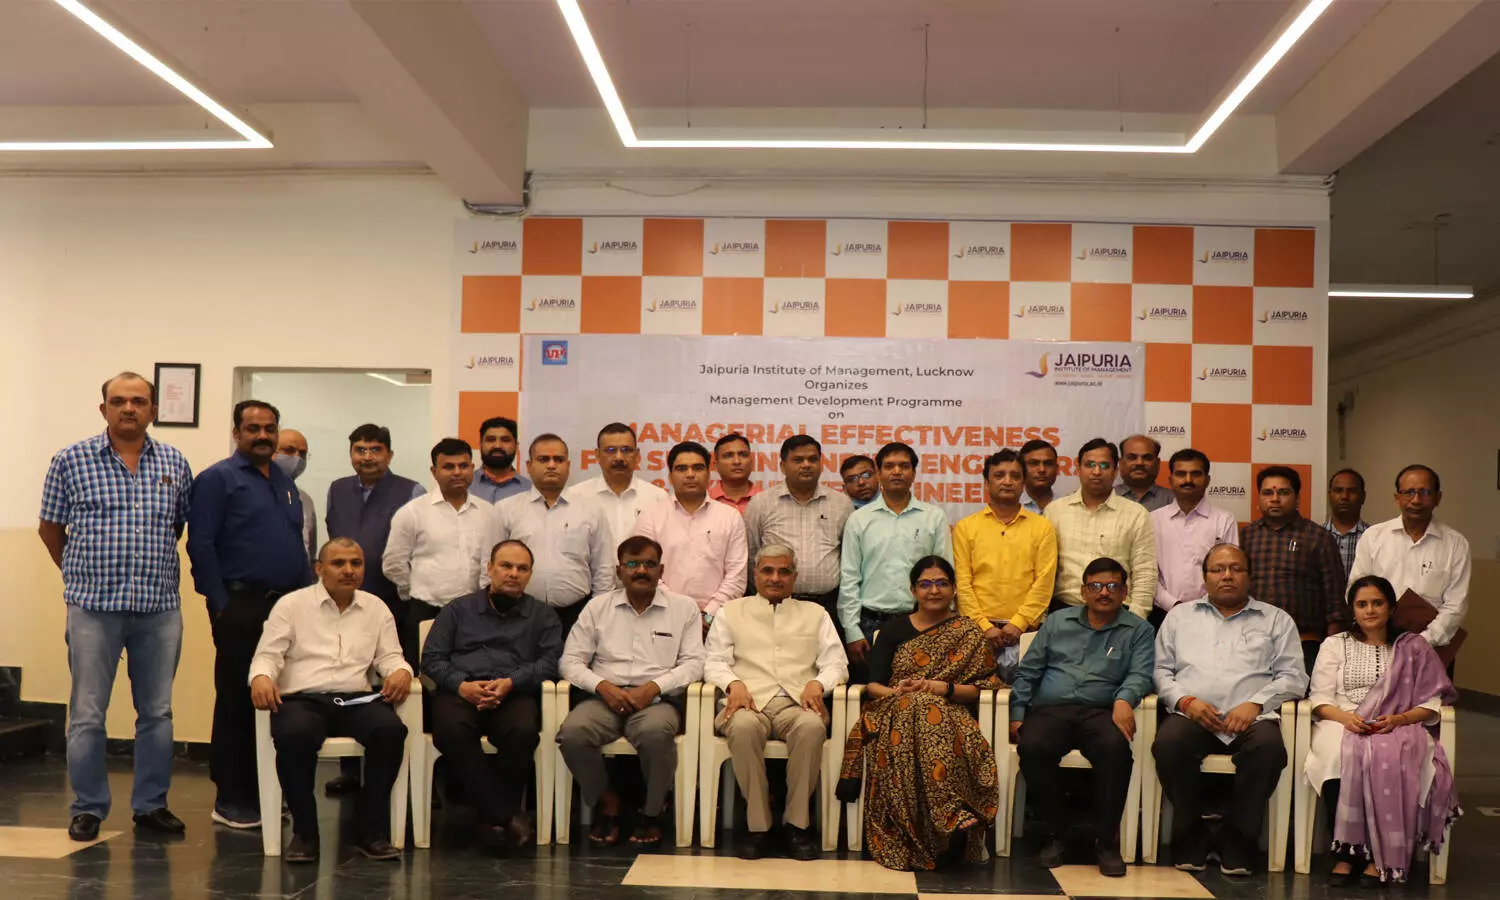 Management Development Programme on Managerial Effectiveness  held at Jaipuria Institute of Management